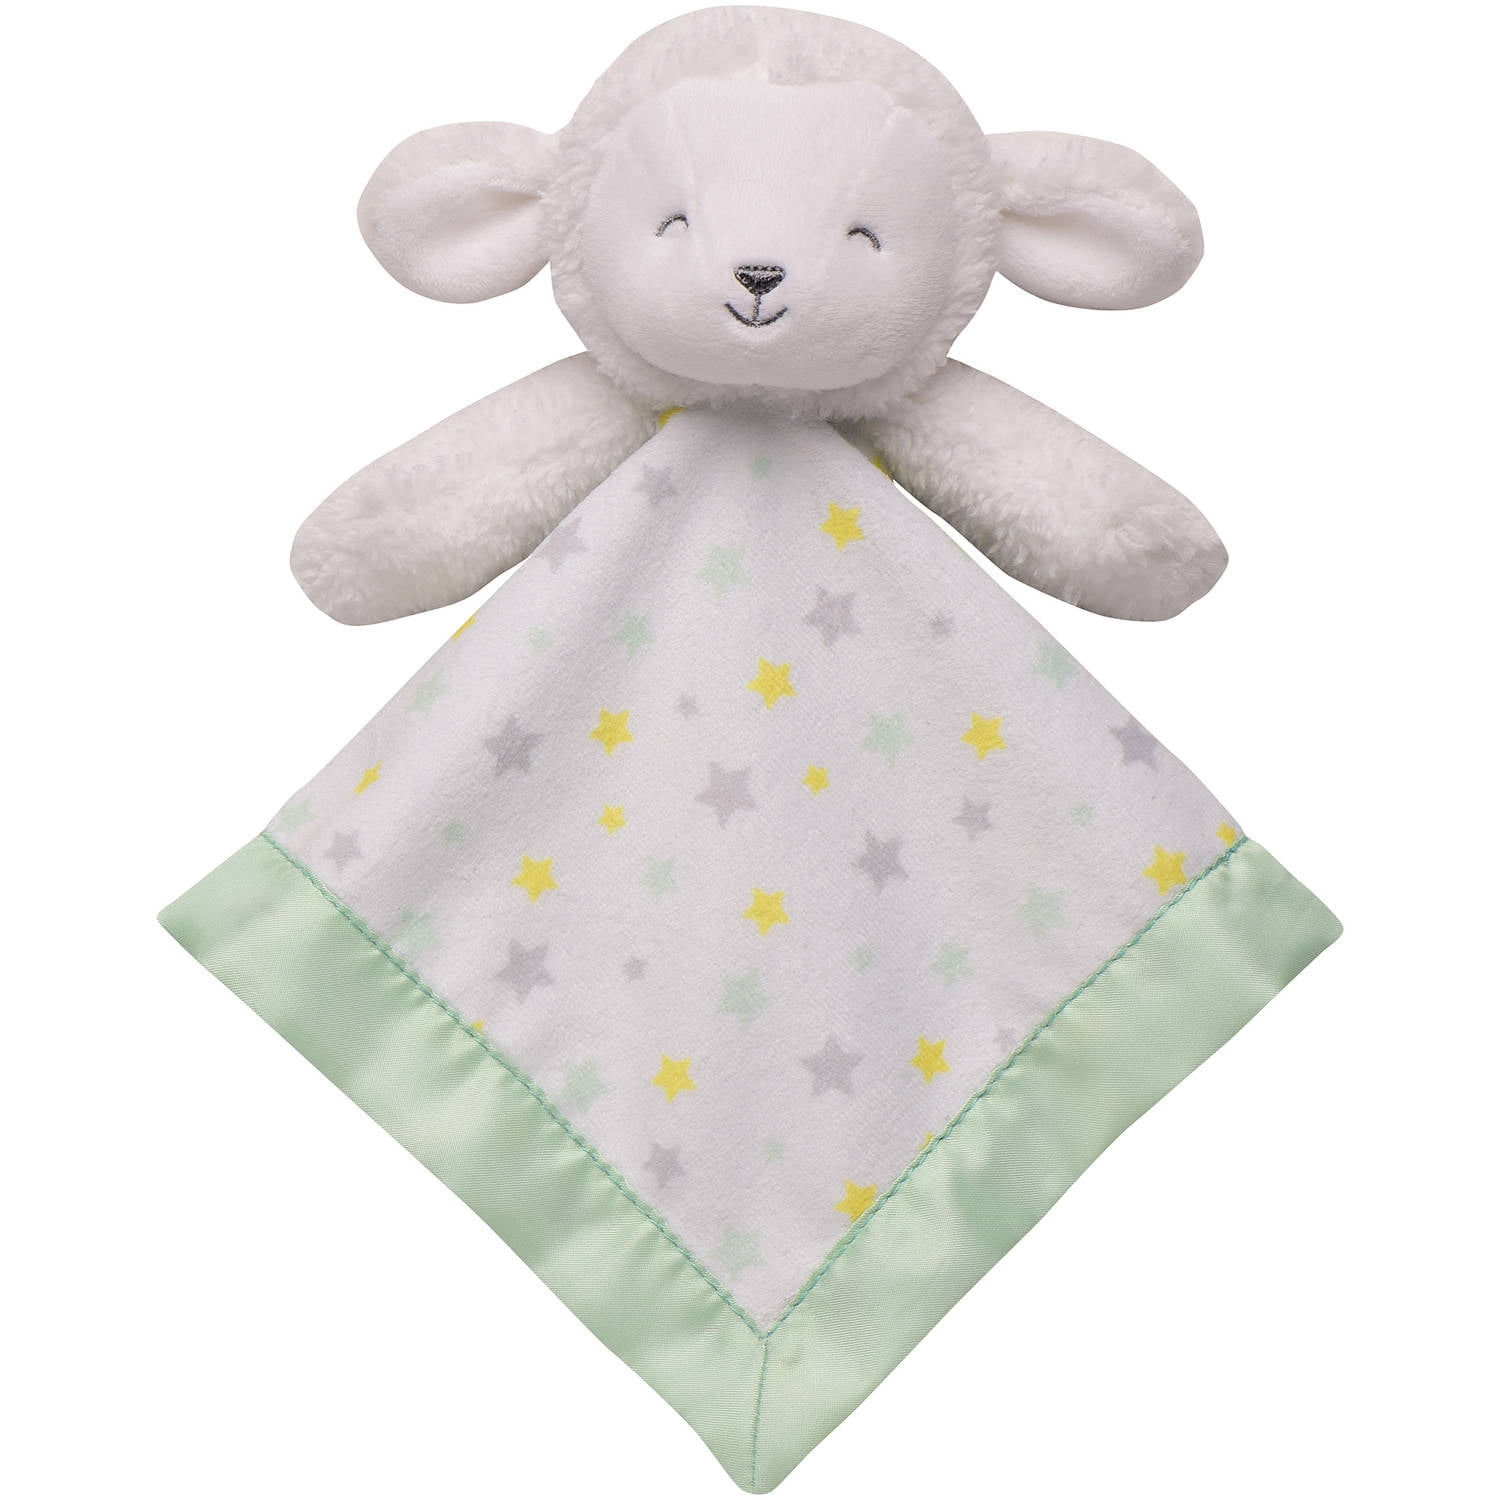 Carters Lamb Gray White Stars Security Blanket Soft Plush Baby Lovey 67048 NWT 